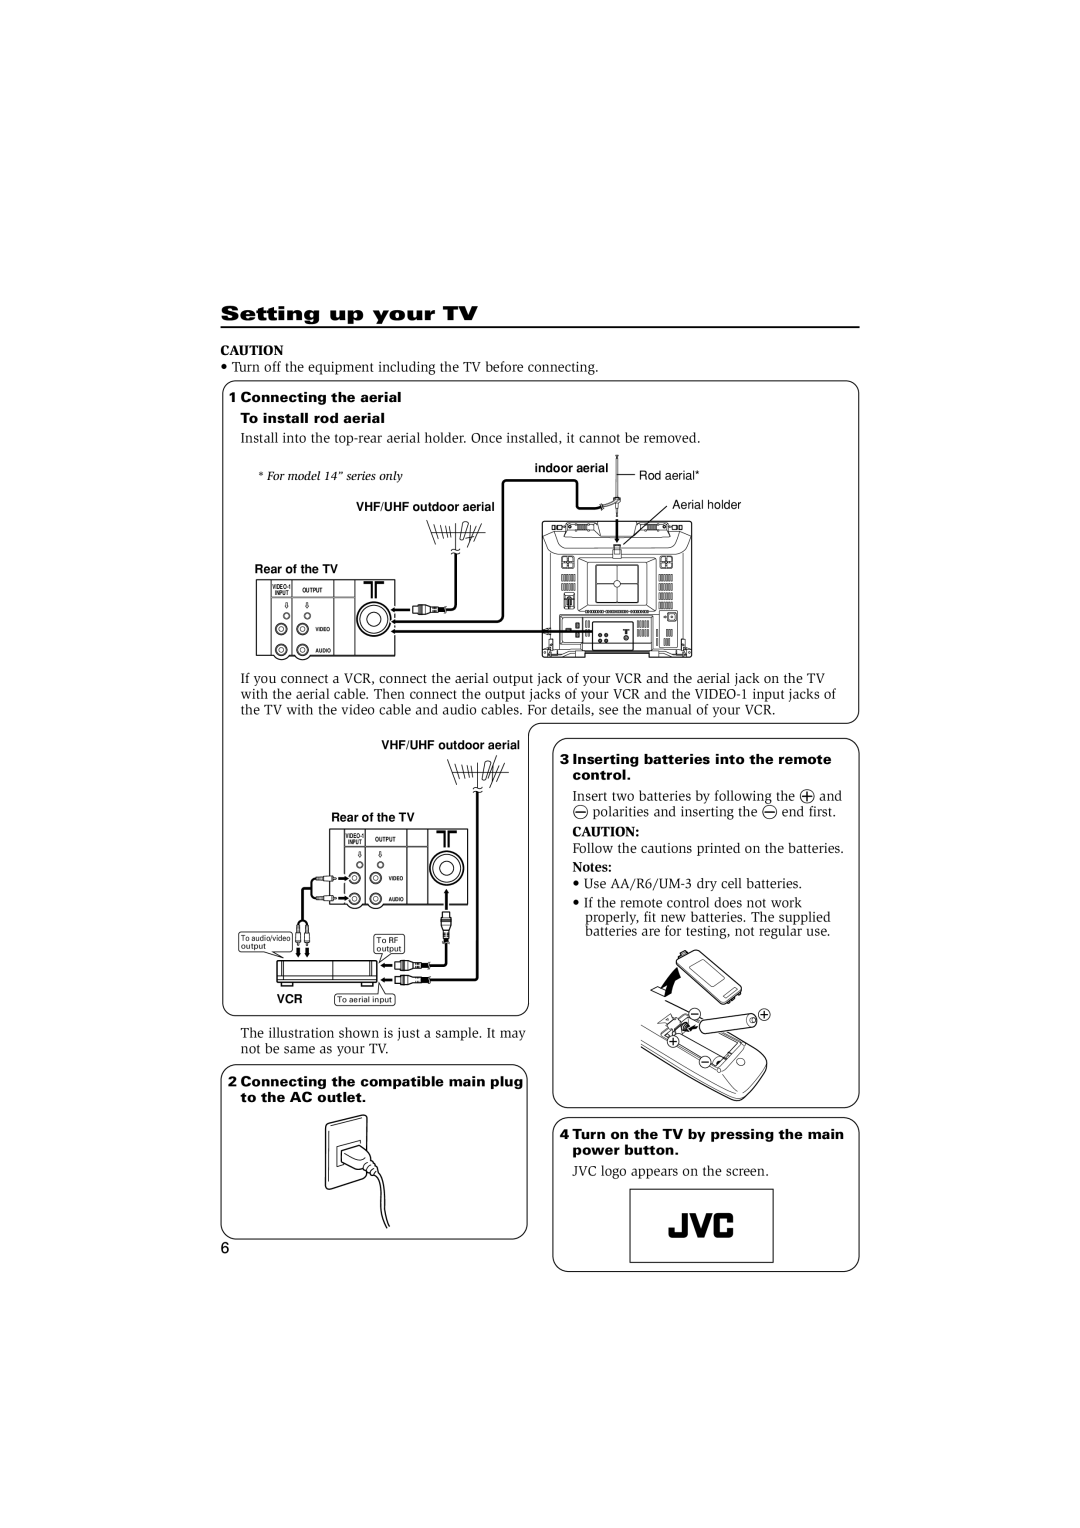 JVC Setting up your TV, Connecting the aerial To install rod aerial, Inserting batteries into the remote control 